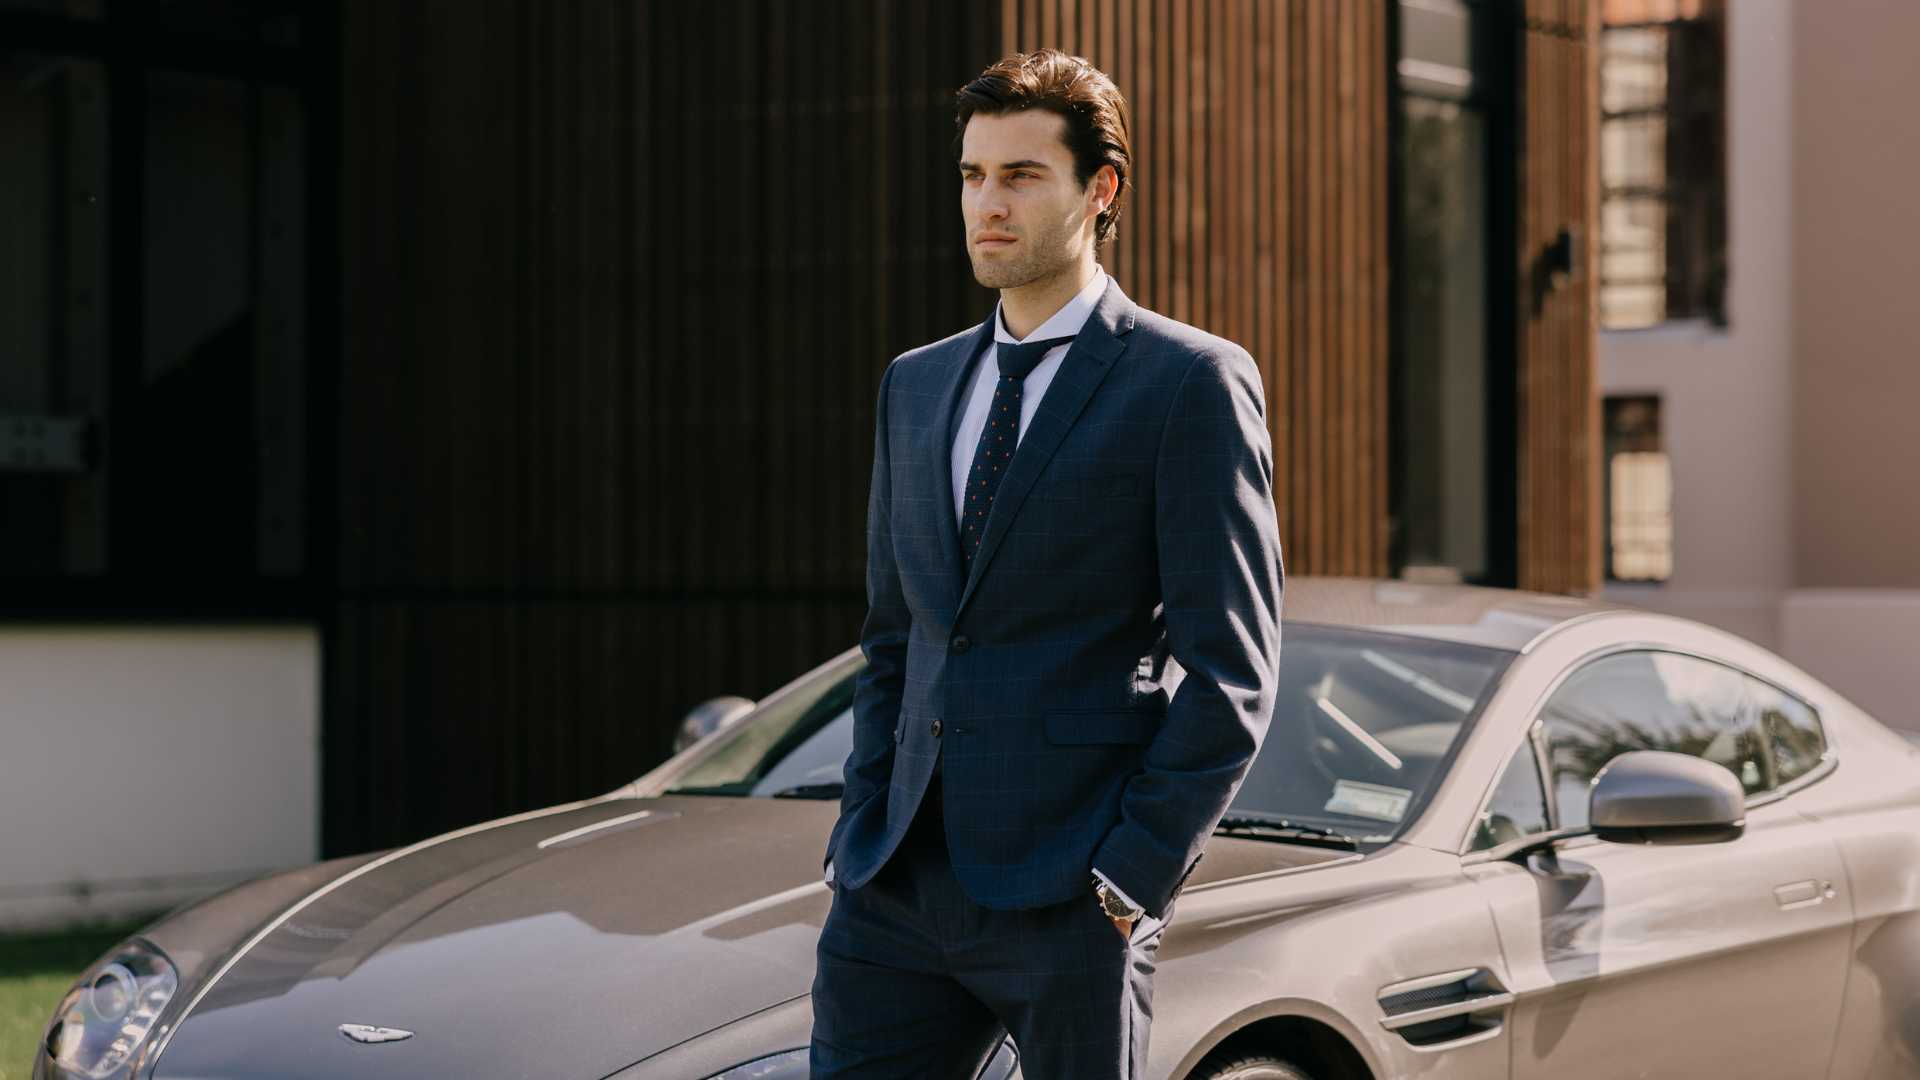 Model wearing navy suit with an extreme cutaway collar dress shirt